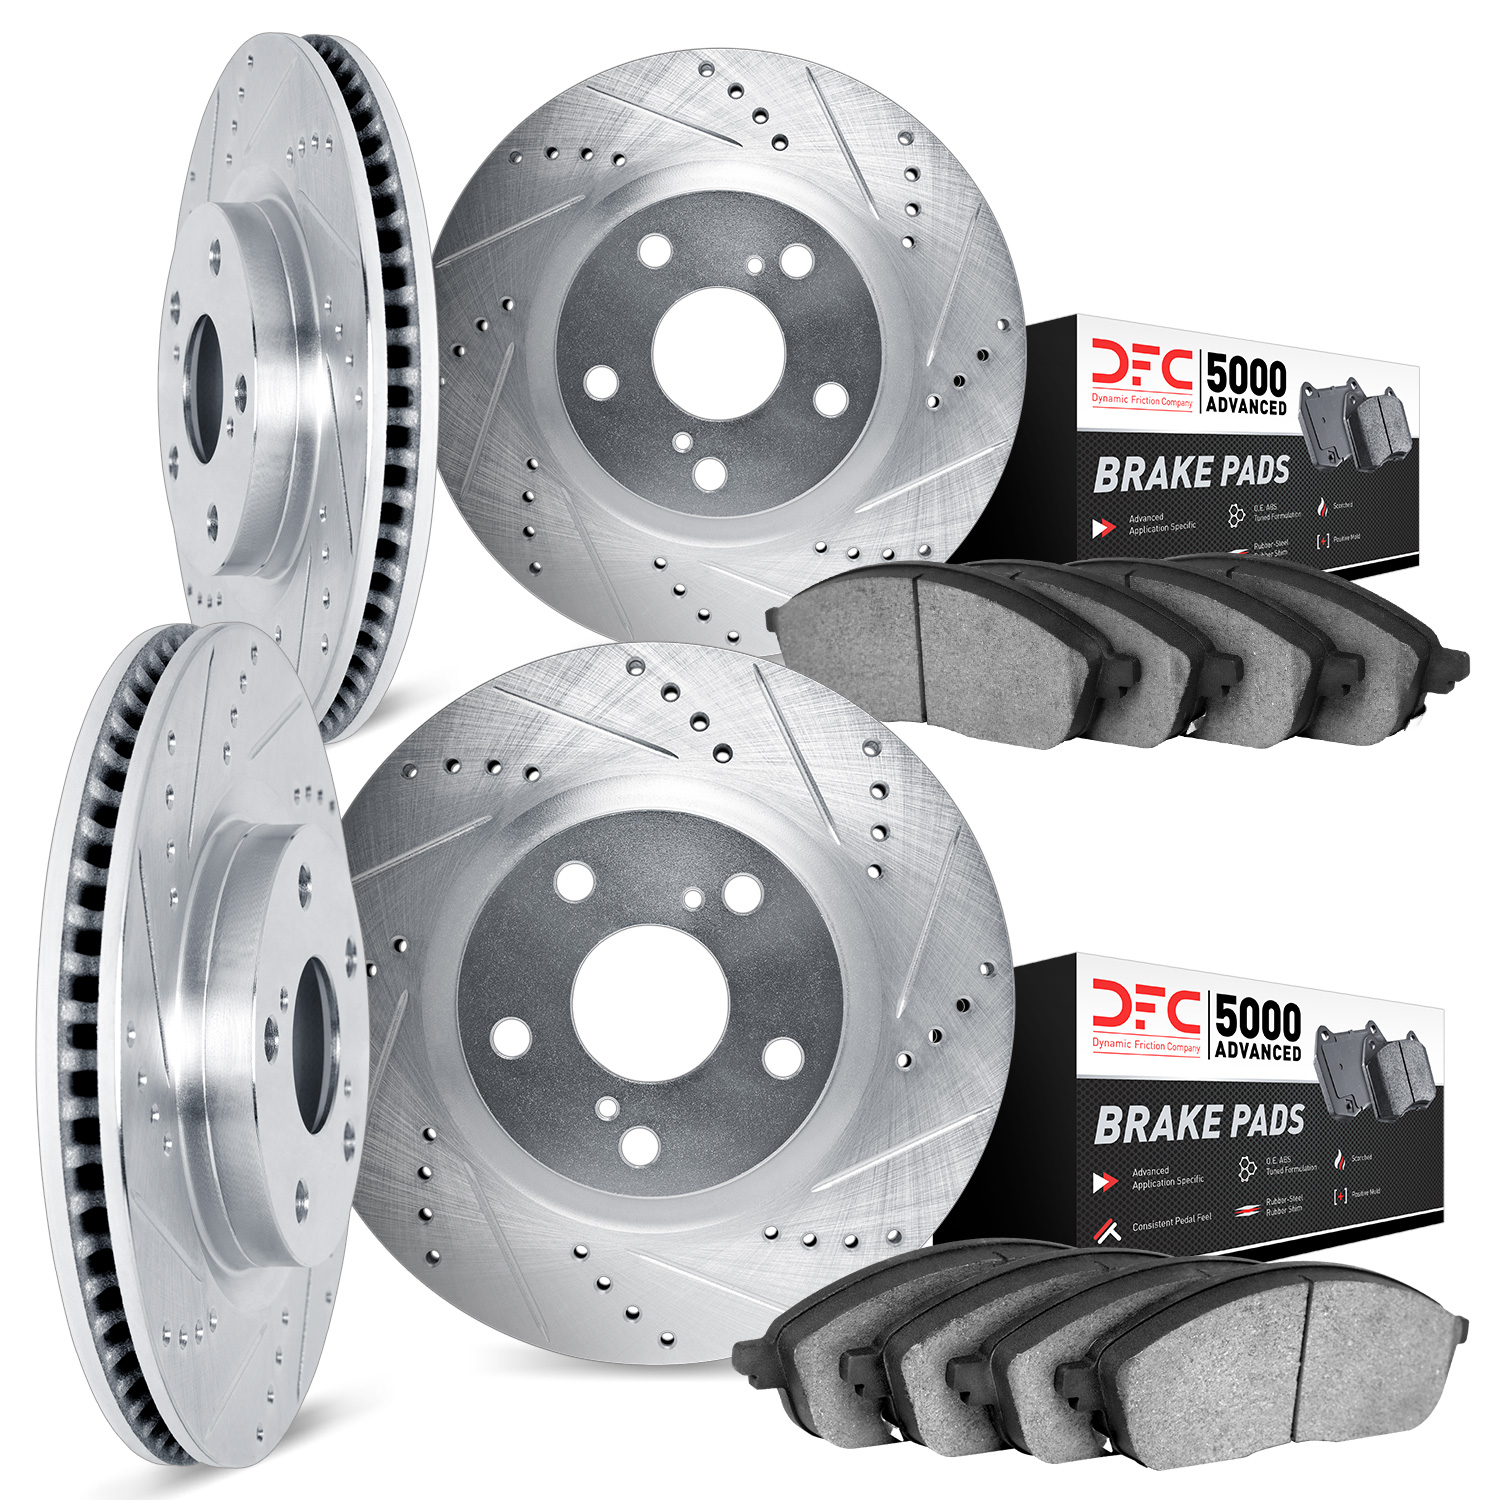 7504-54276 Drilled/Slotted Brake Rotors w/5000 Advanced Brake Pads Kit [Silver], 2000-2006 Ford/Lincoln/Mercury/Mazda, Position: